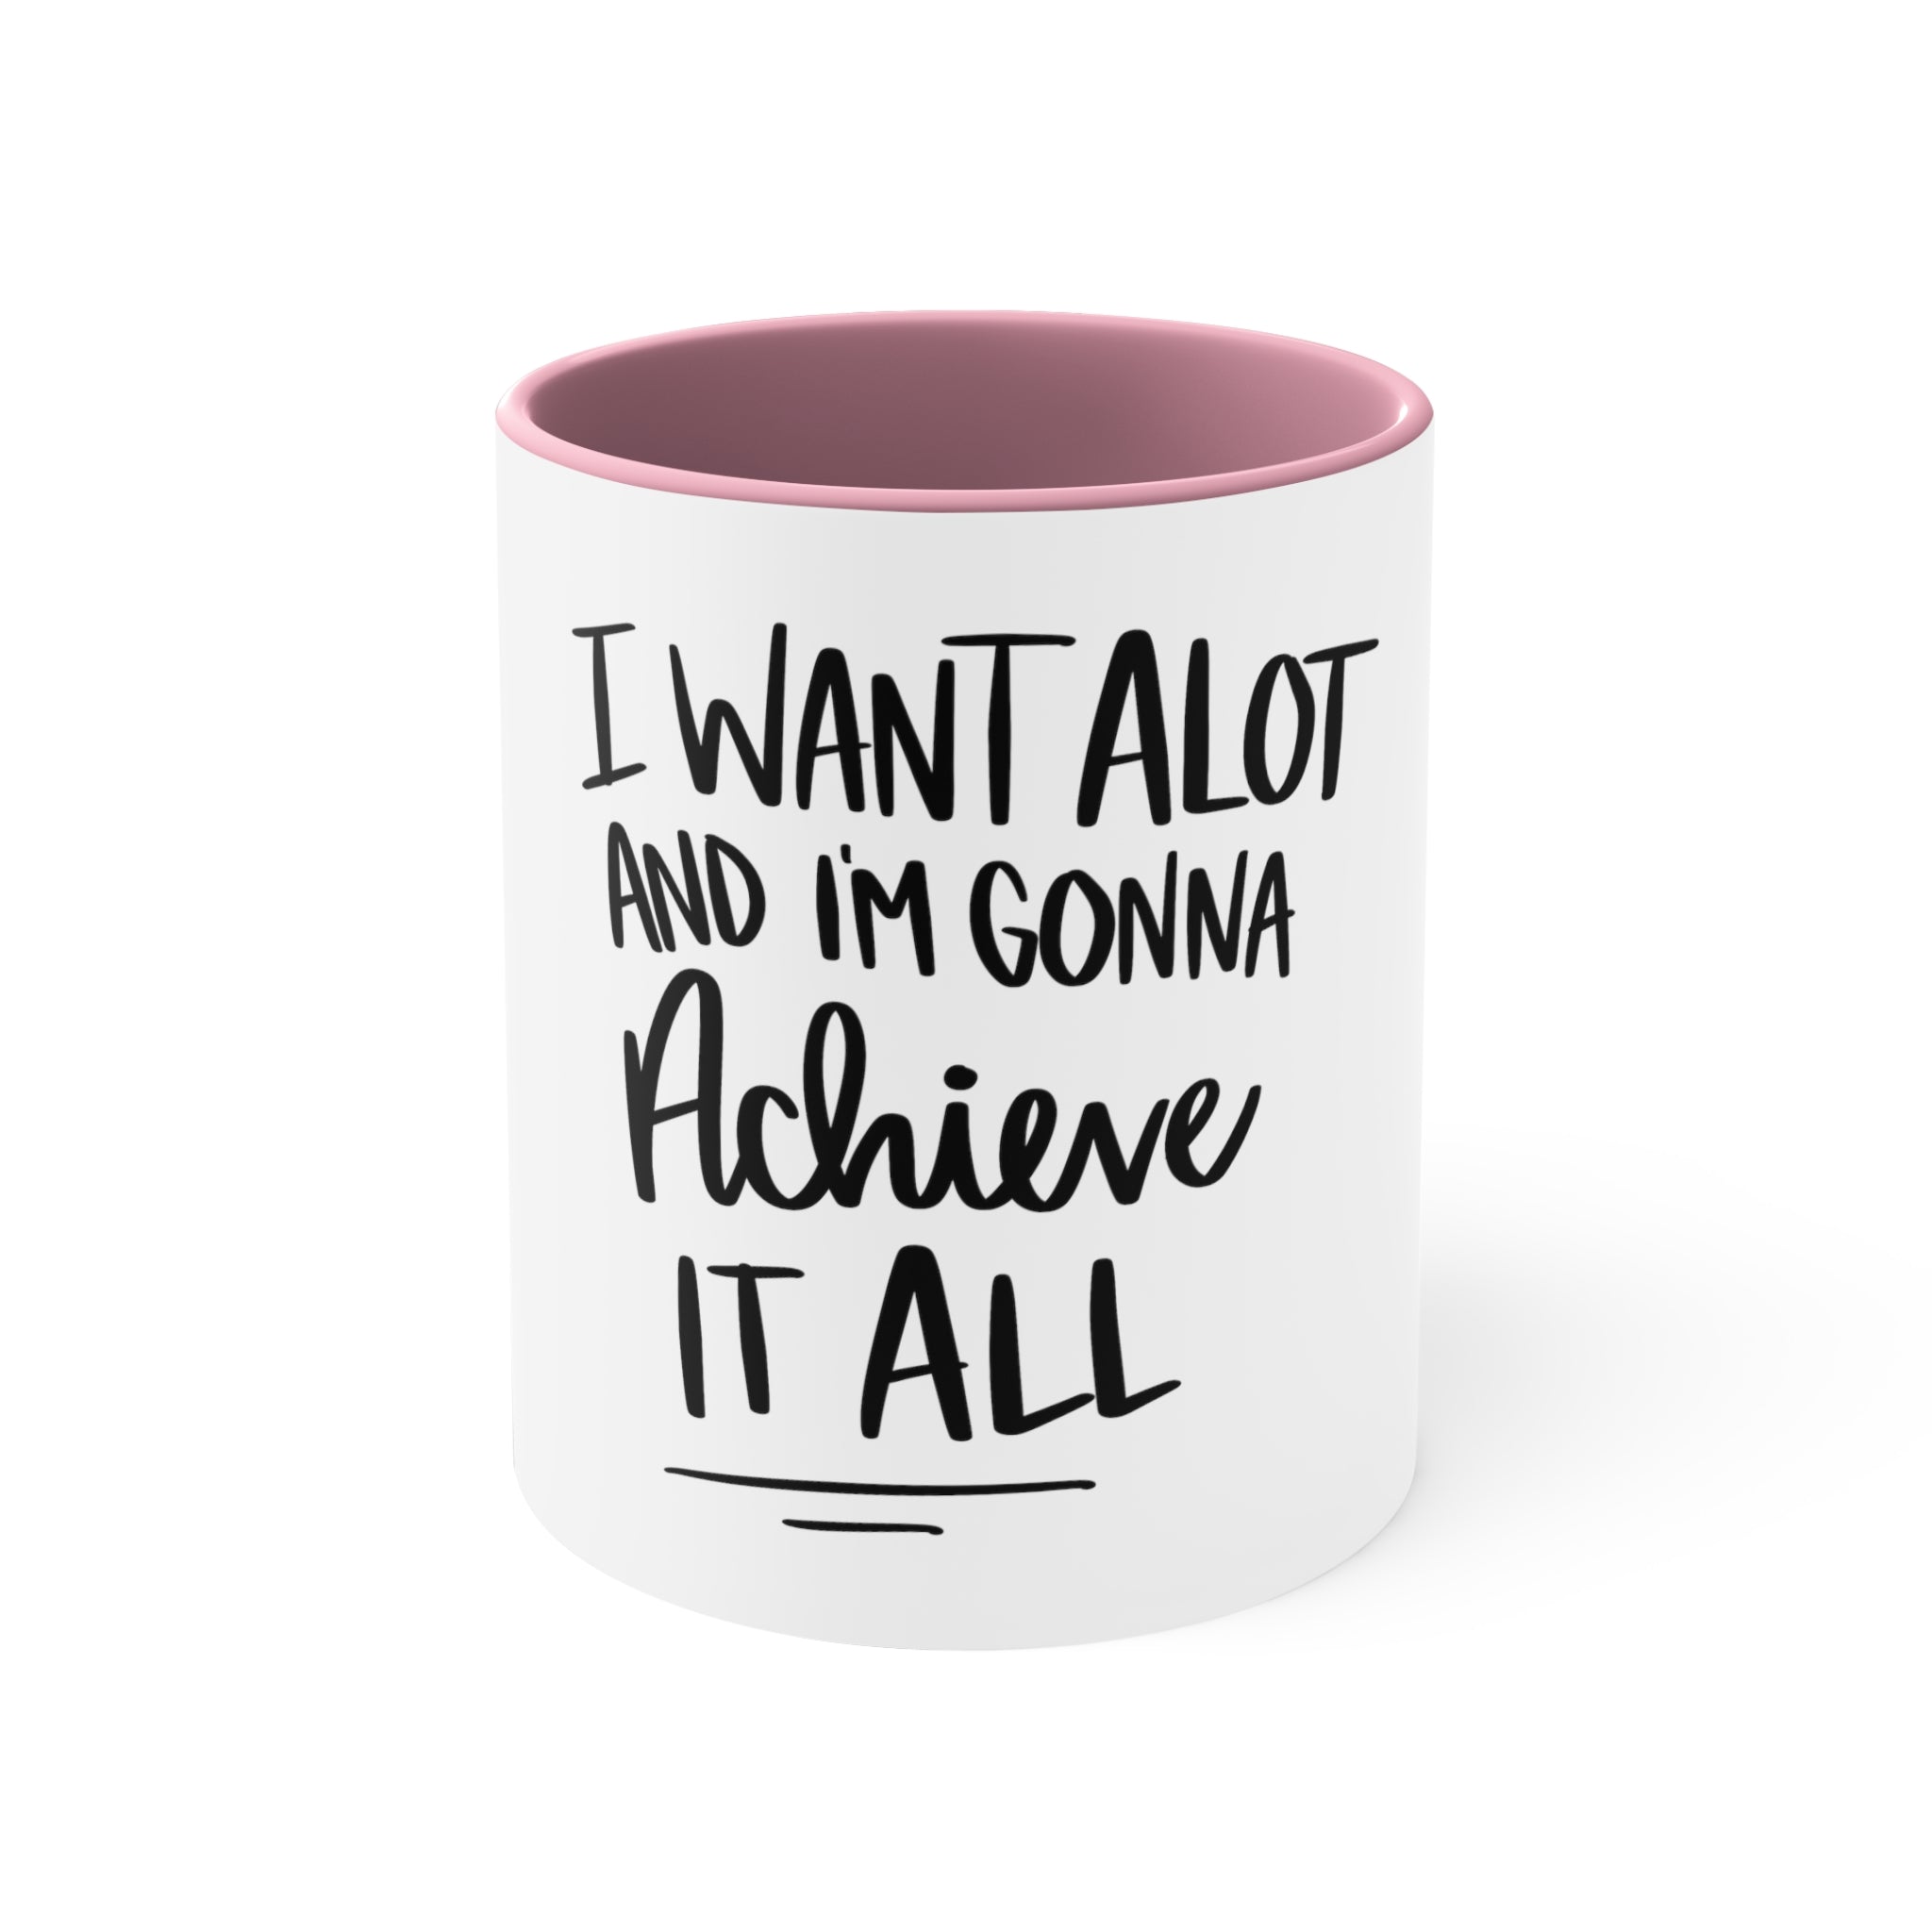 I Want A Lot And I'm Gonna Achieve It All Accent Coffee Mug, 11oz